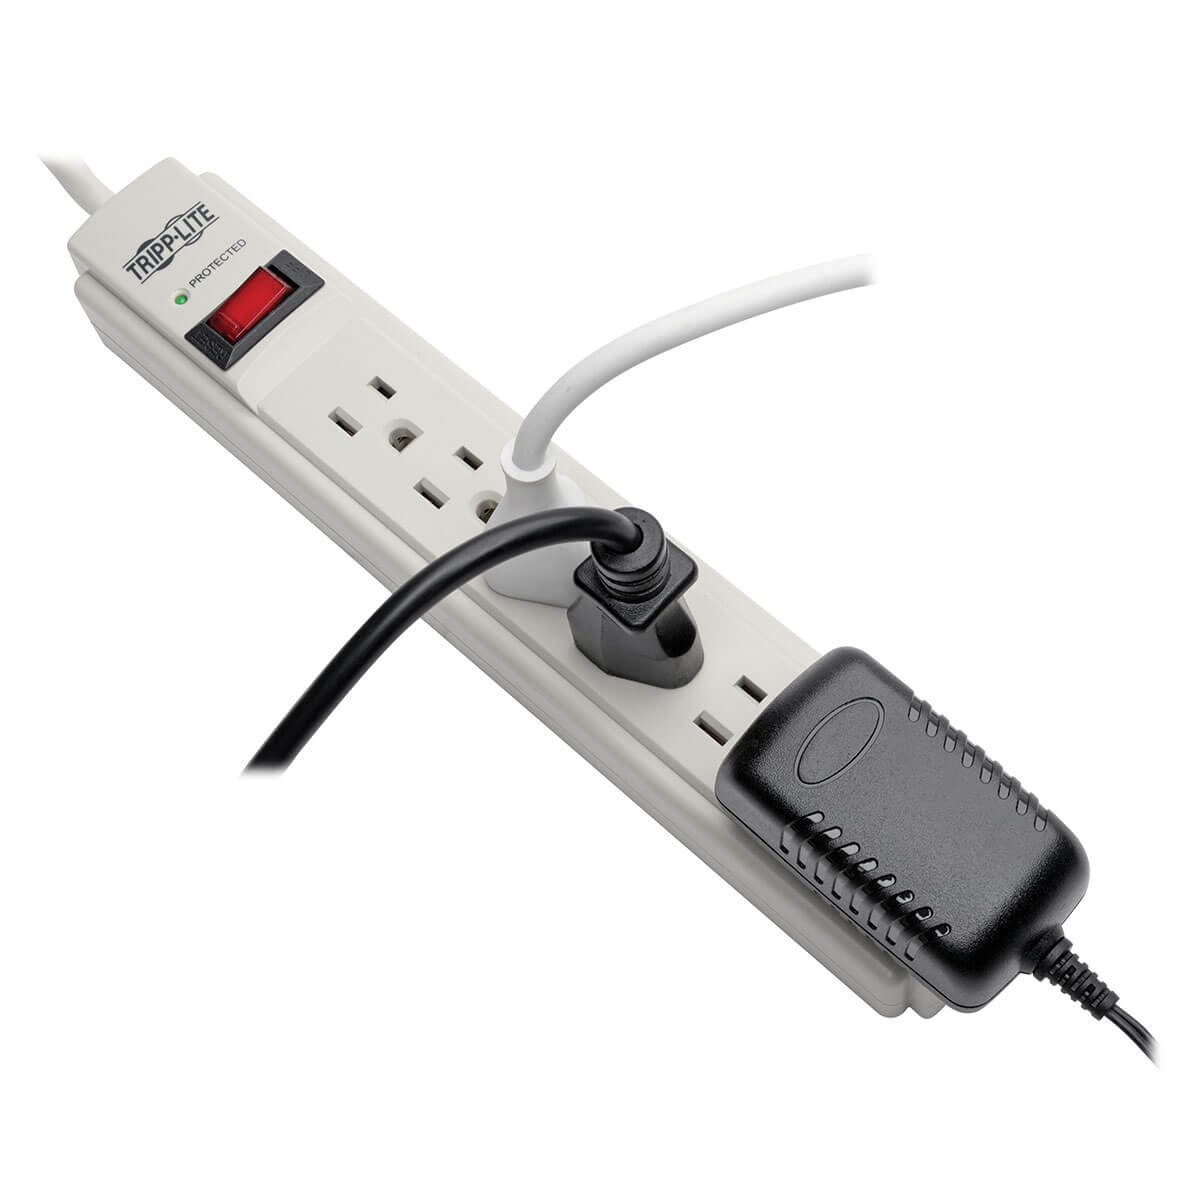 Tripp Lite 6 Outlet Surge Protector Power Strip, Extra Long Cord 15ft, & $20,000 INSURANCE (TLP615) Gray